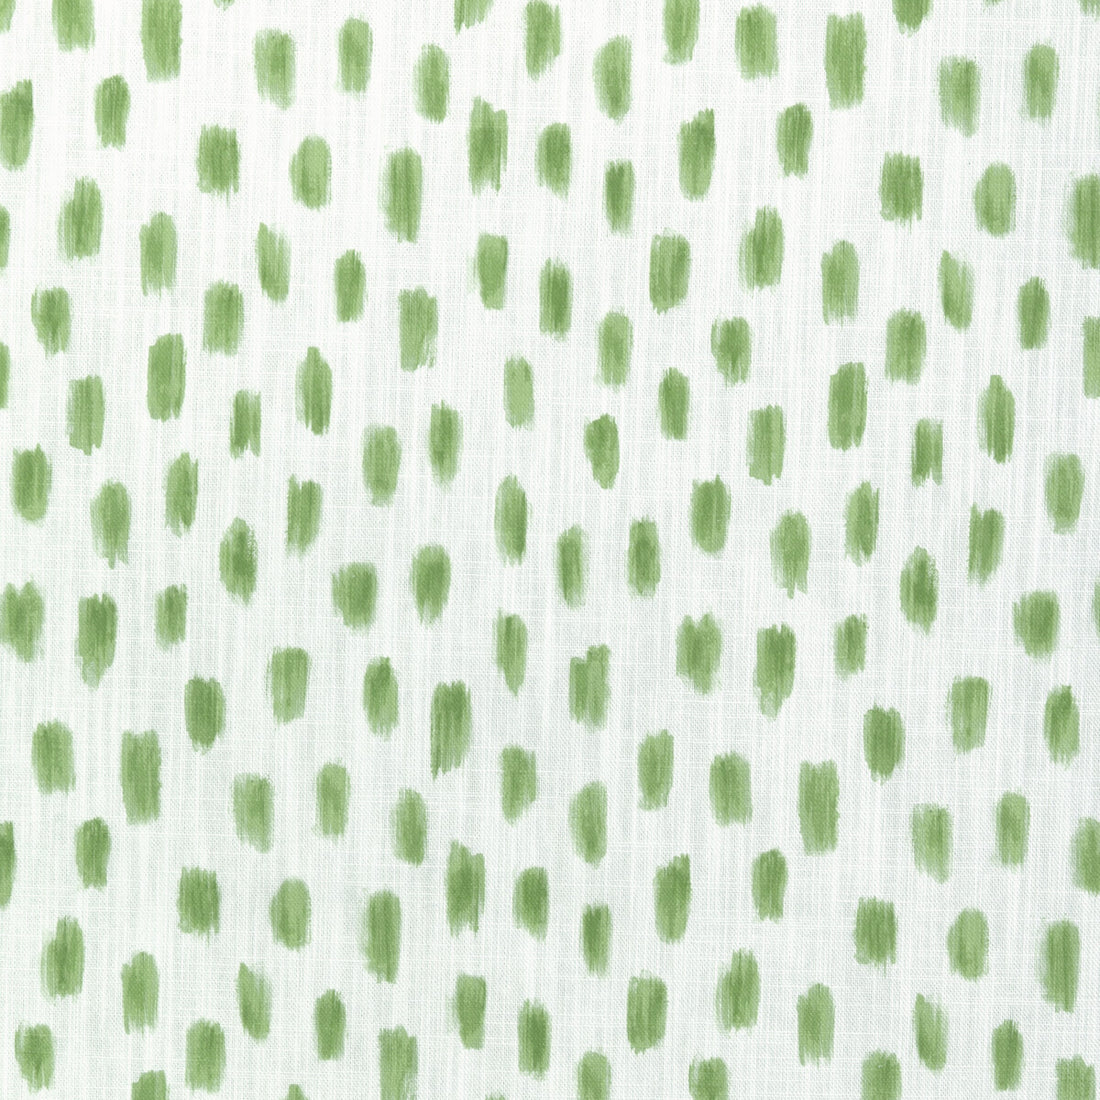 Brush Off fabric in lime color - pattern BRUSH OFF.31.0 - by Kravet Basics in the Small Scale Prints collection